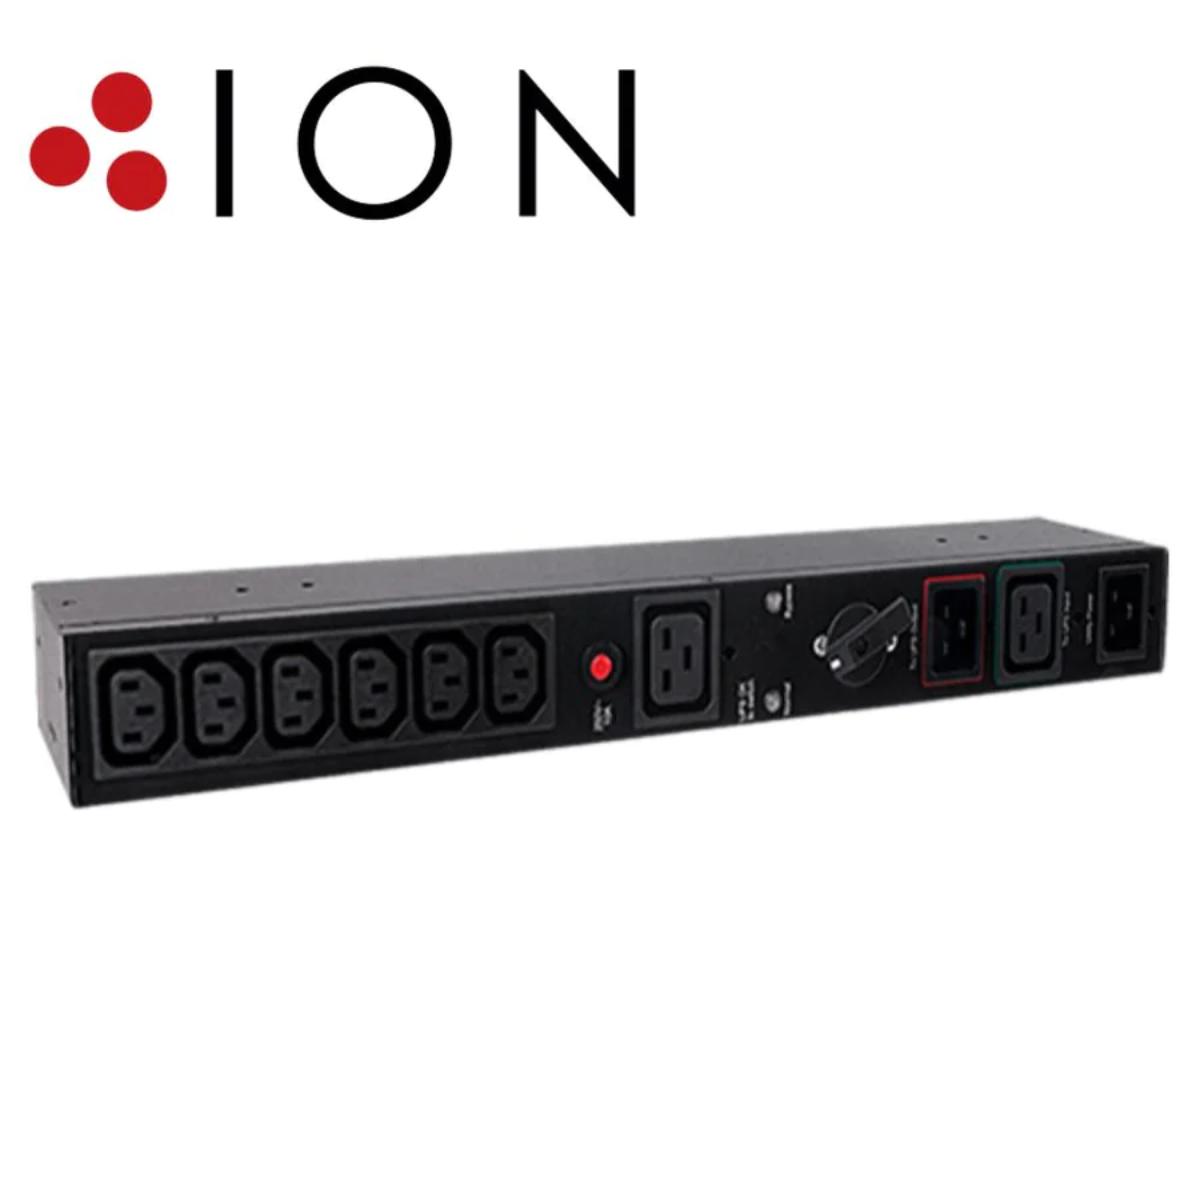 ION 16AMP MAINTENANCE BYPASS SWITCH